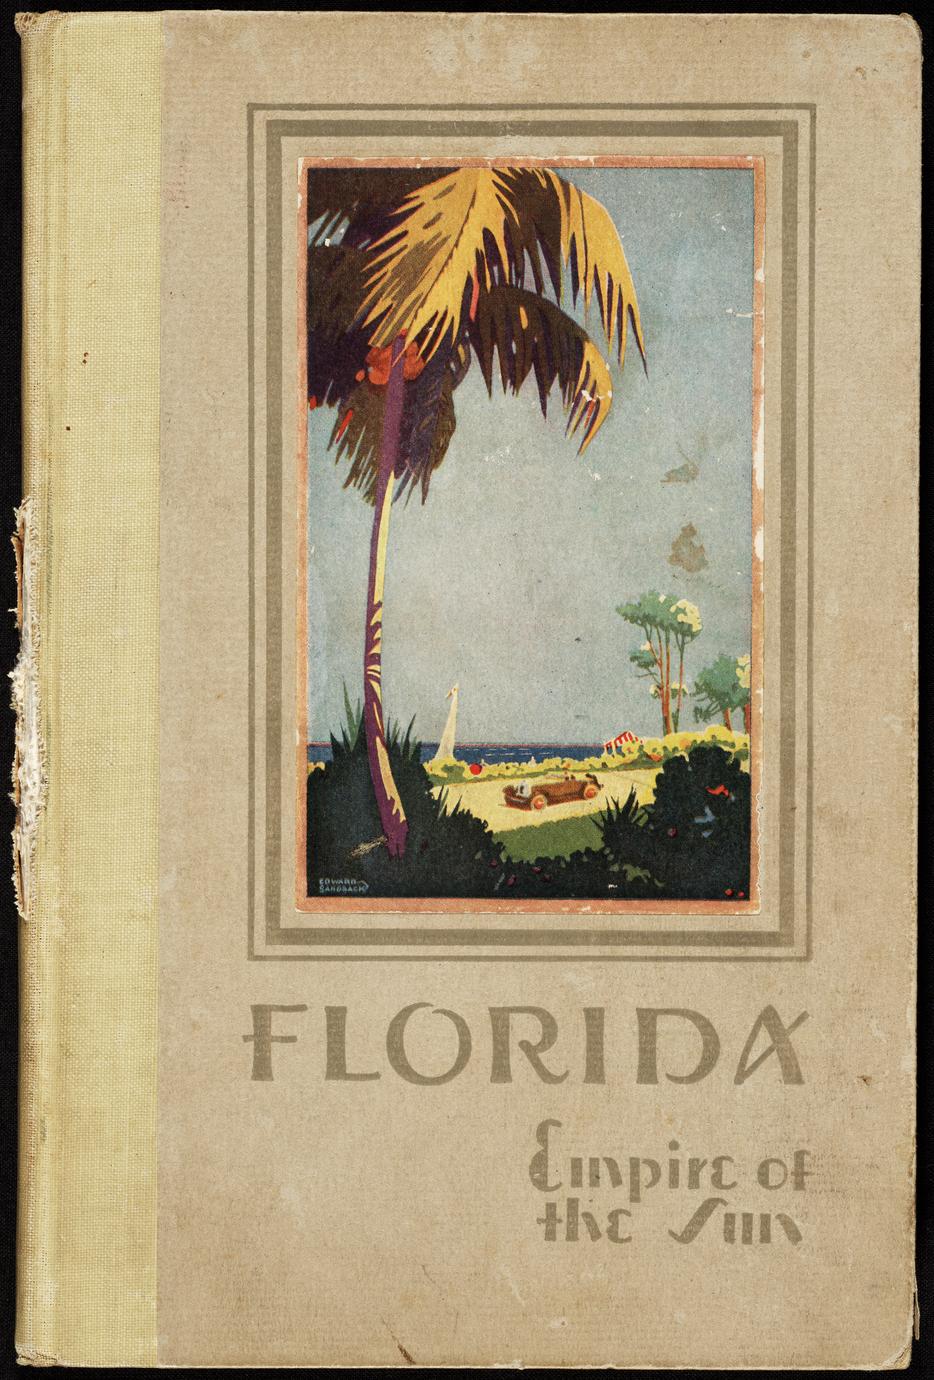 Florida : empire of the sun : a description of the living advantages of Florida cities, the pleasures, recreations and resort facilitites now available to visitors and prospective residents